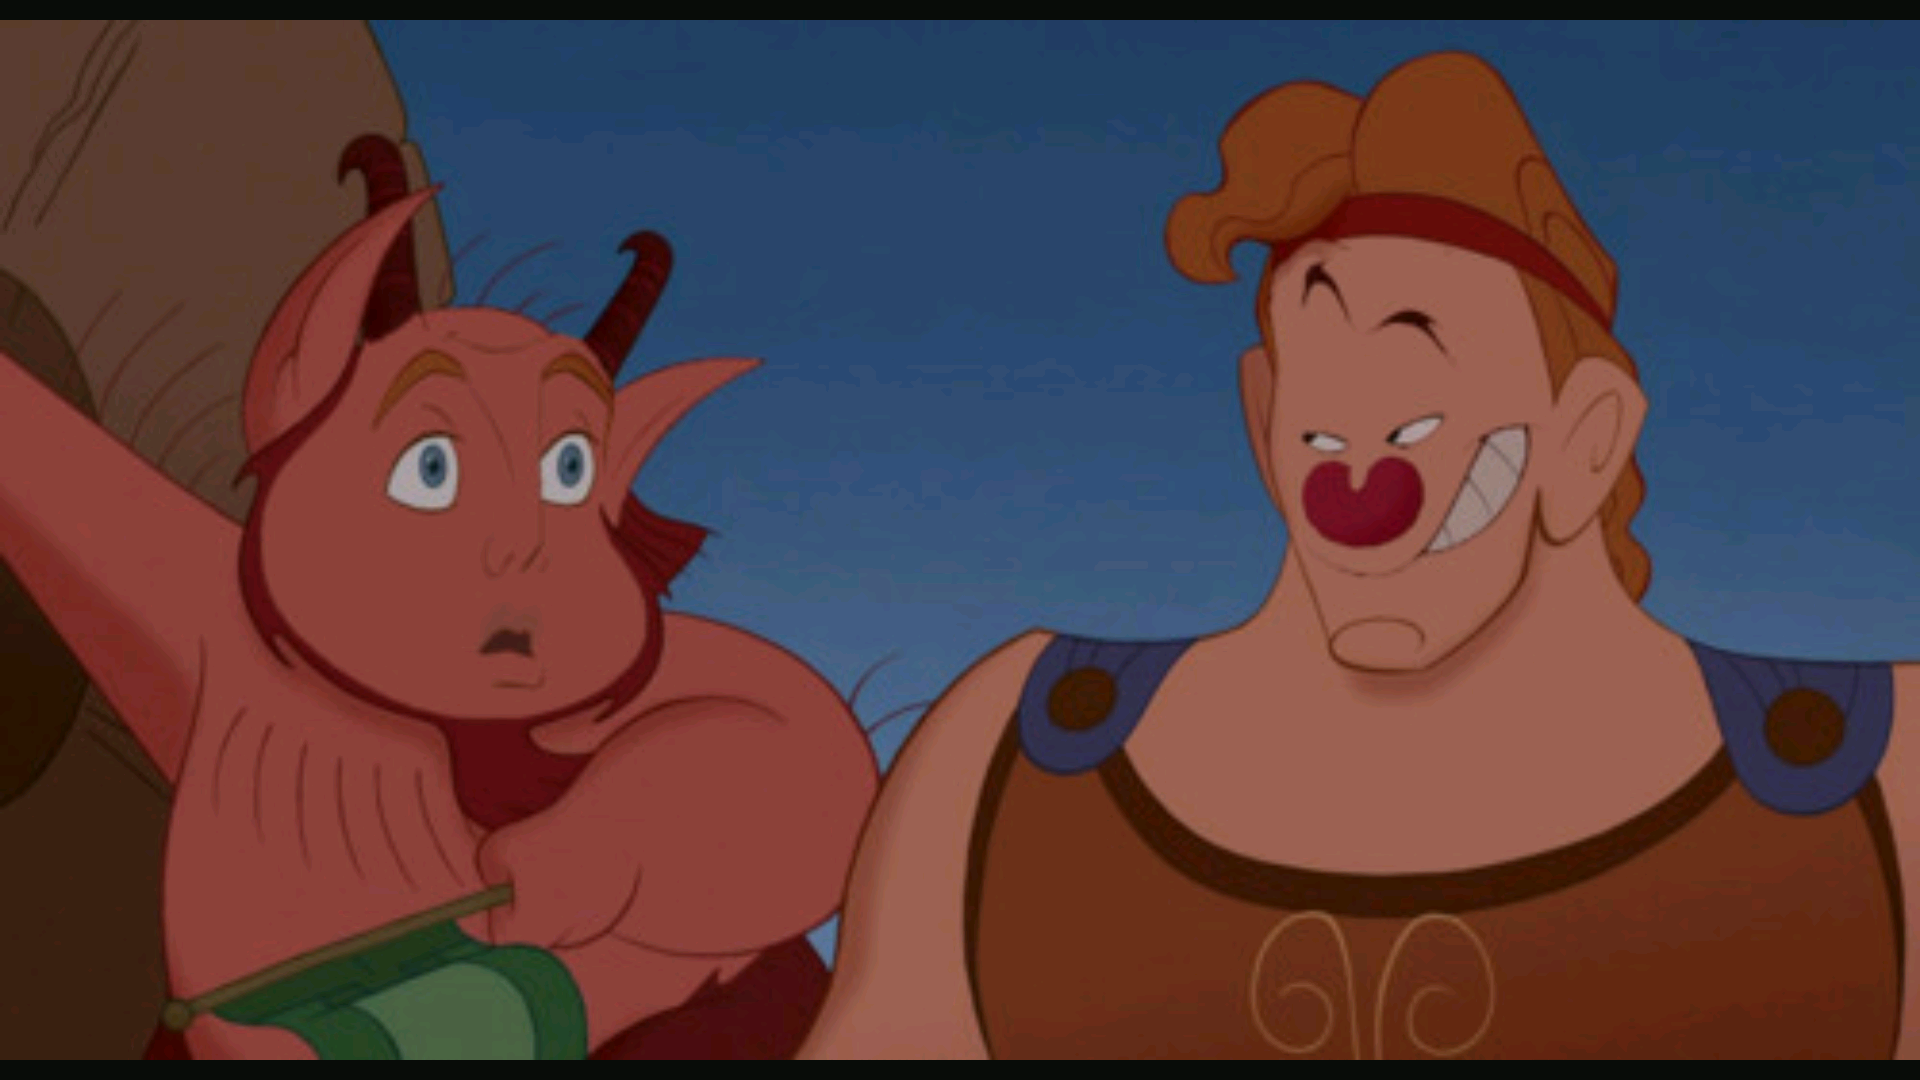 Phil Actually Looks Better Than Hercules in This Swap